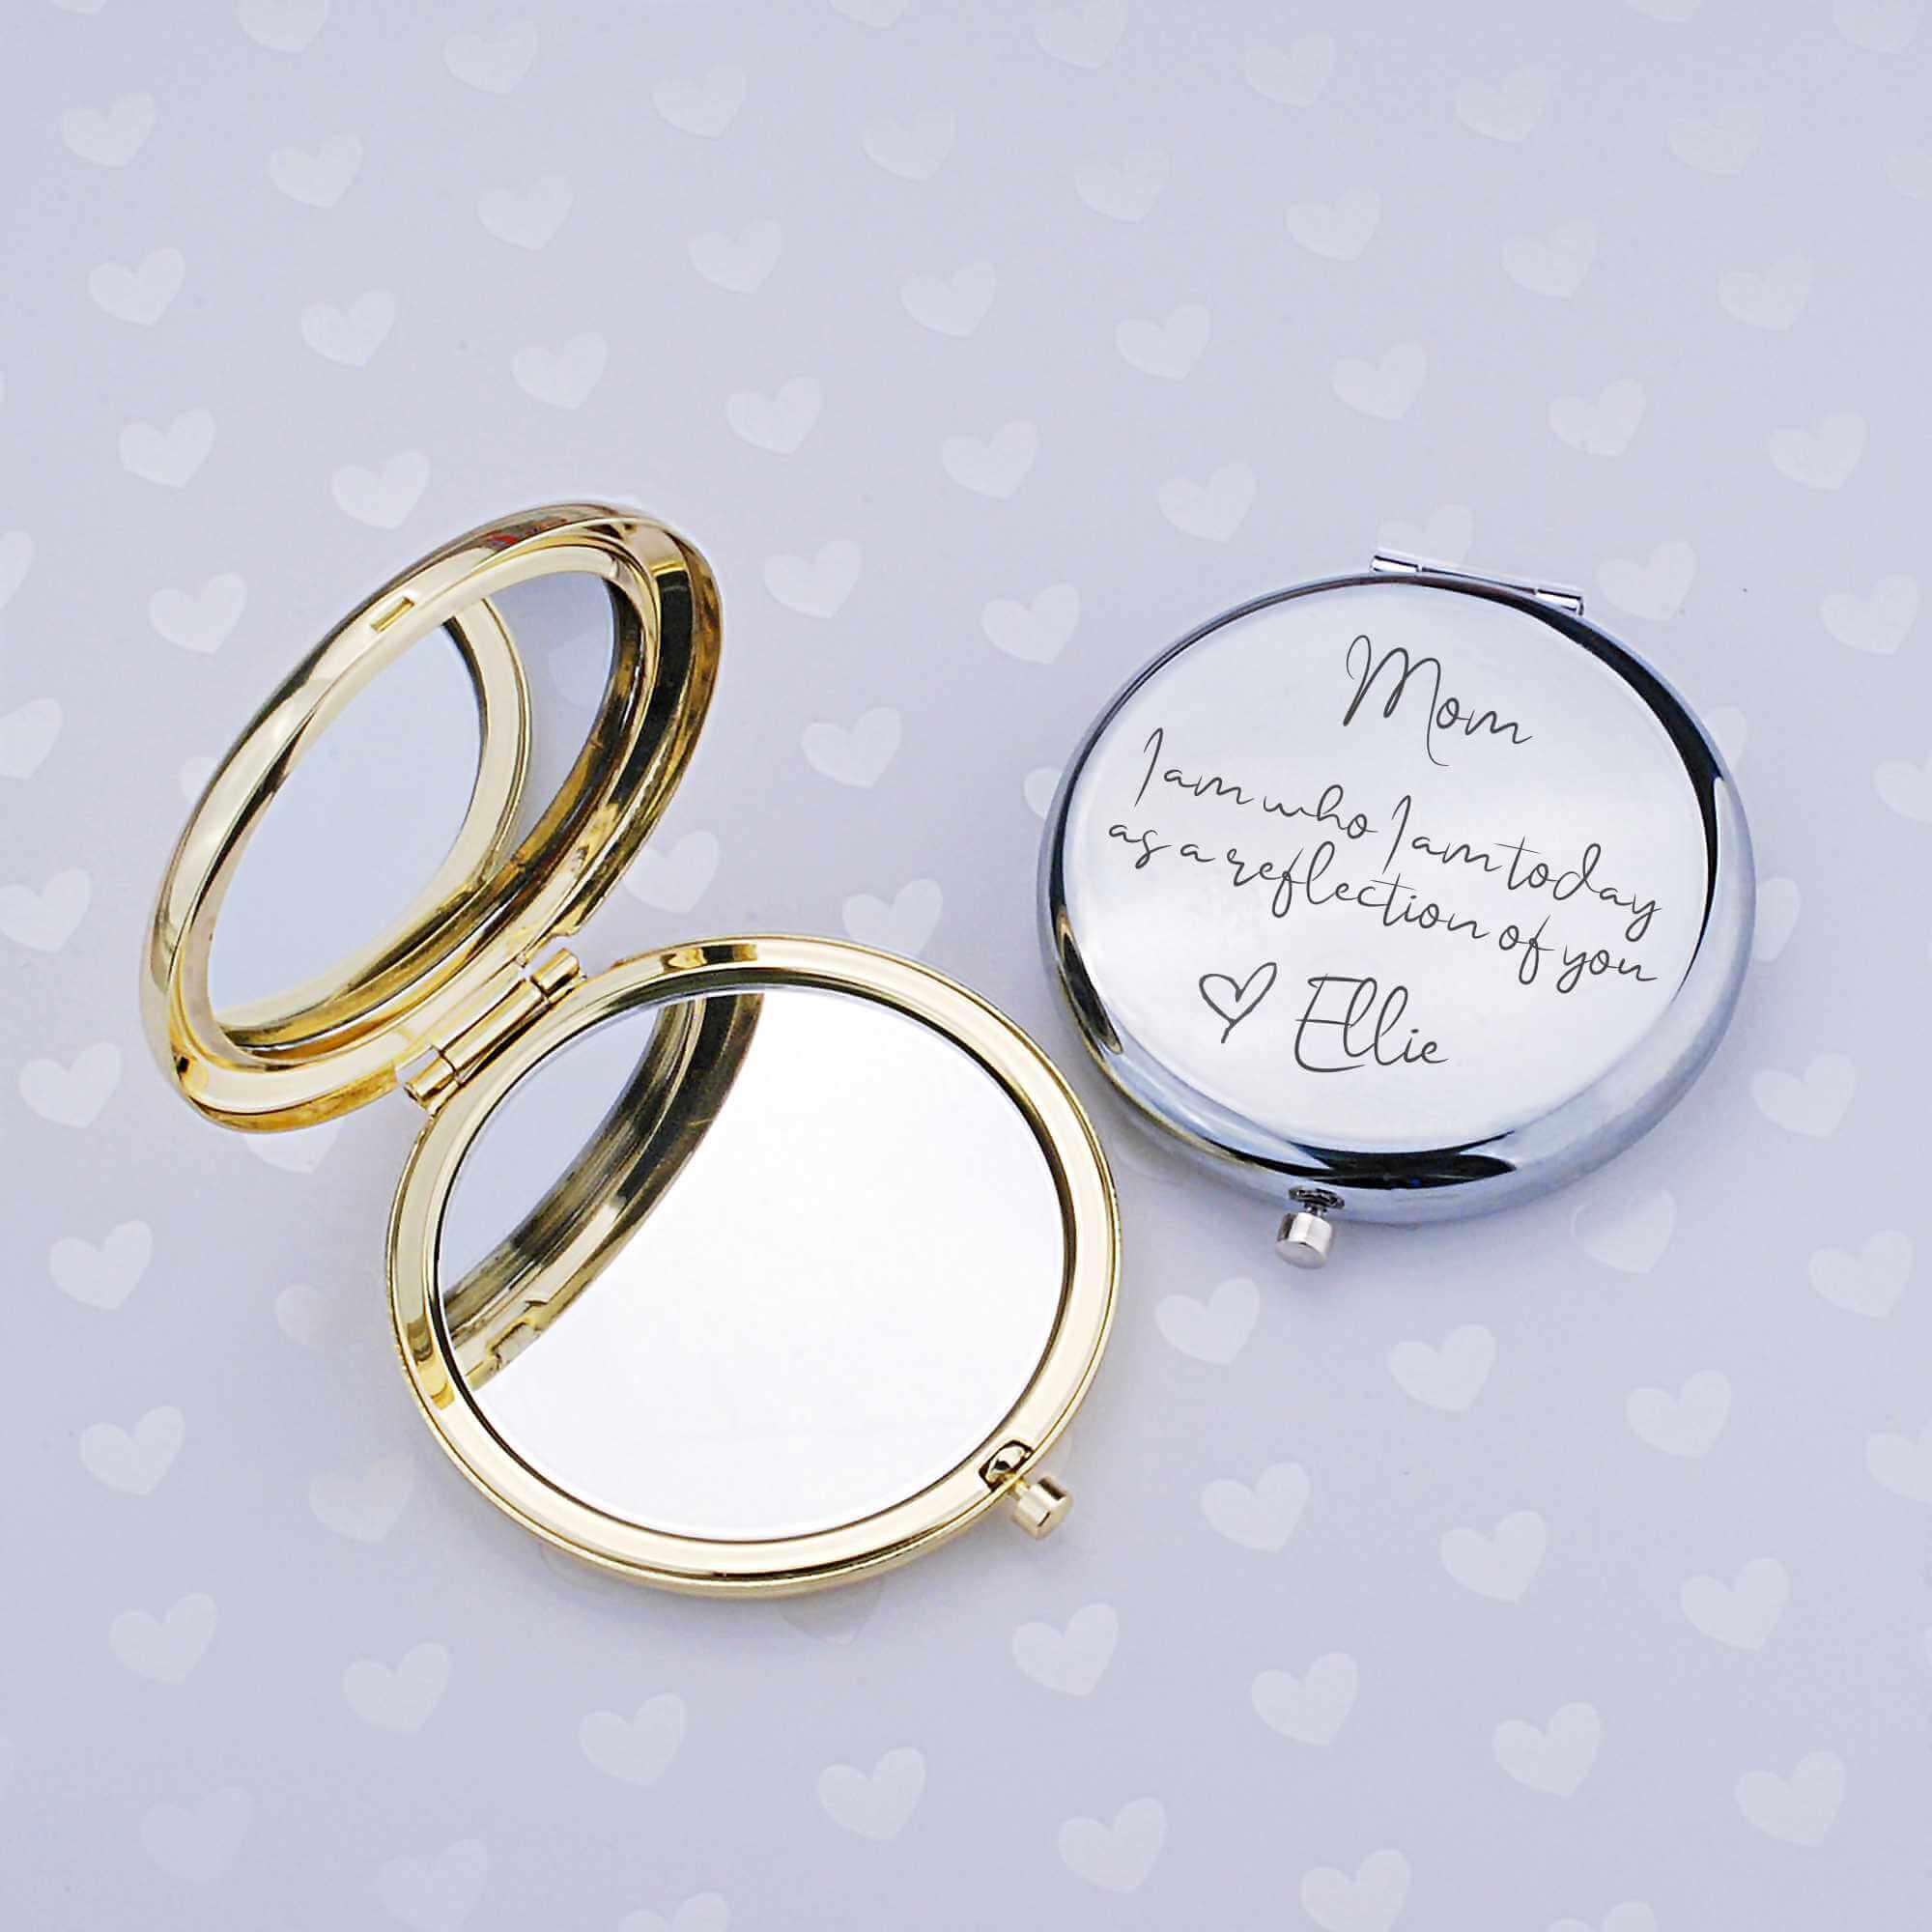 Gifts for Mom-I Love You Mom Gift Compact Mirror,Birthday Gifts for Mom-  Unique Love Gifts for Mom,Women,Mom Gift for Mothers Day,Valentines Gifts  for Her